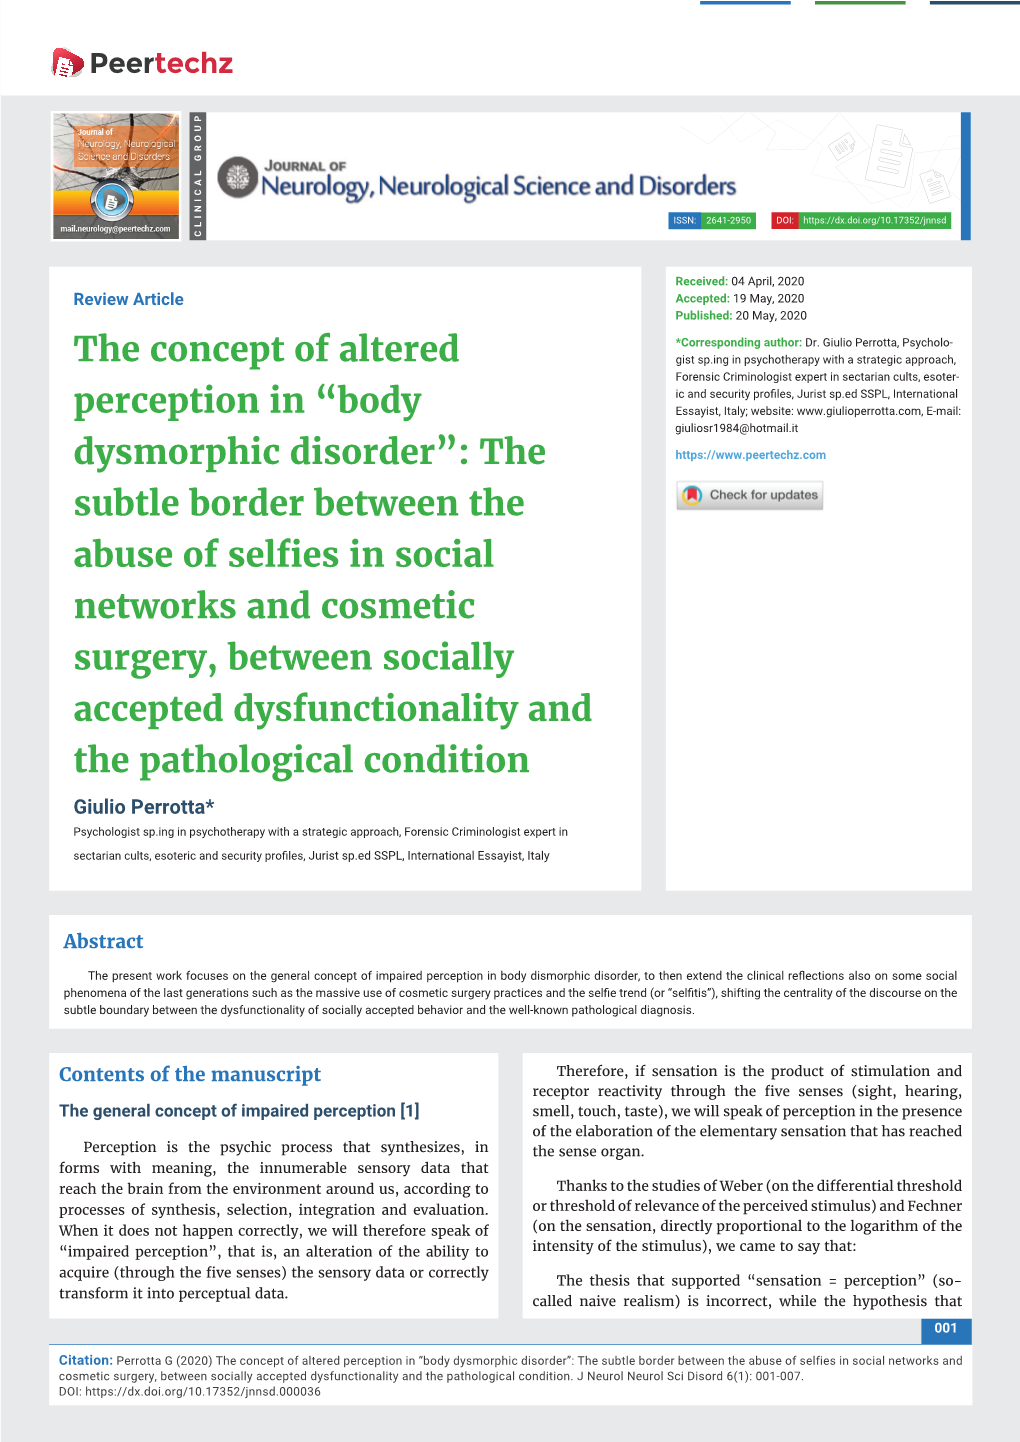 The Concept of Altered Perception in “Body Dysmorphic Disorder”